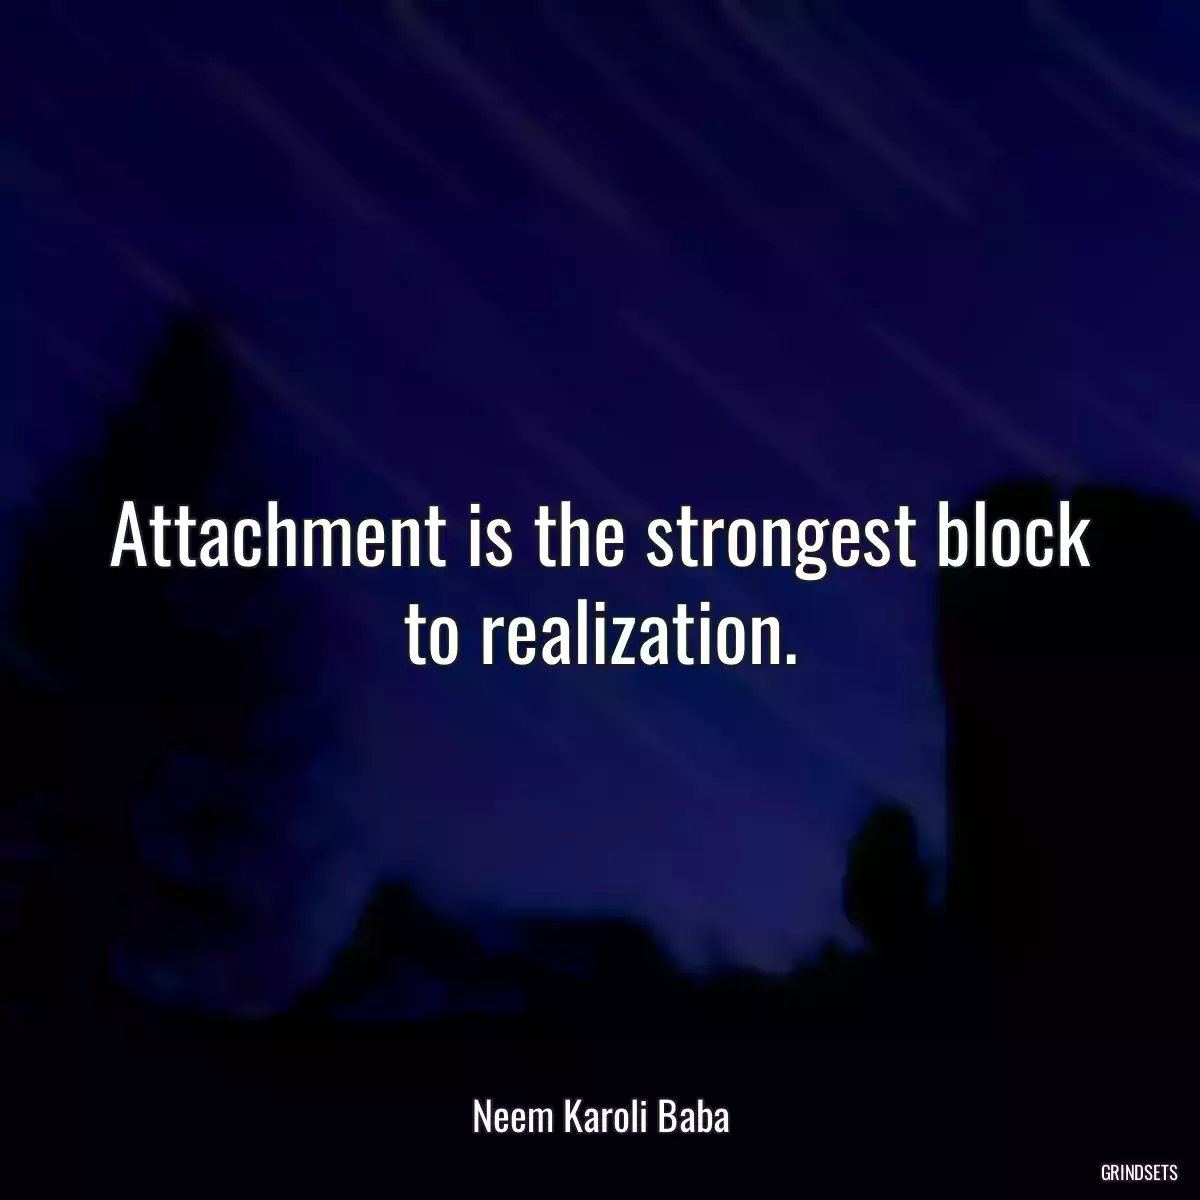 Attachment is the strongest block to realization.